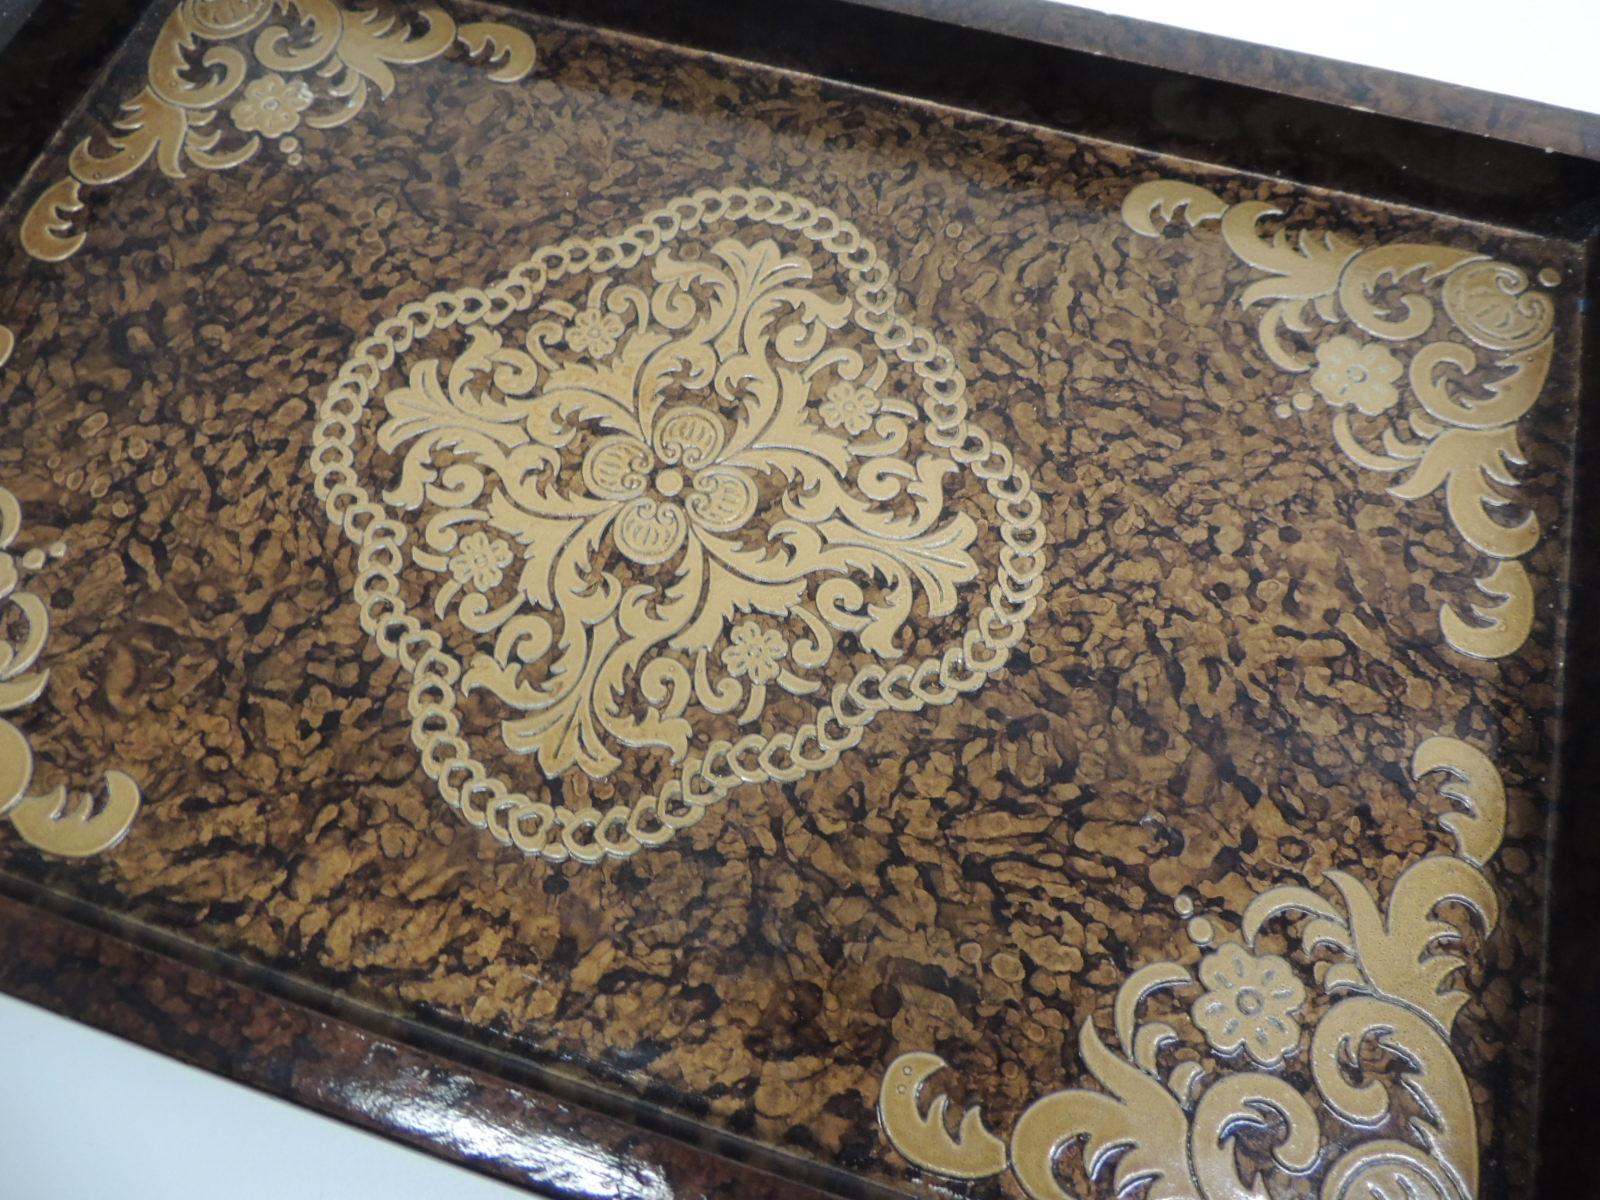 Chinoiserie Asian Lacquered Decorative Wood Modern Tray in Brown and Gold